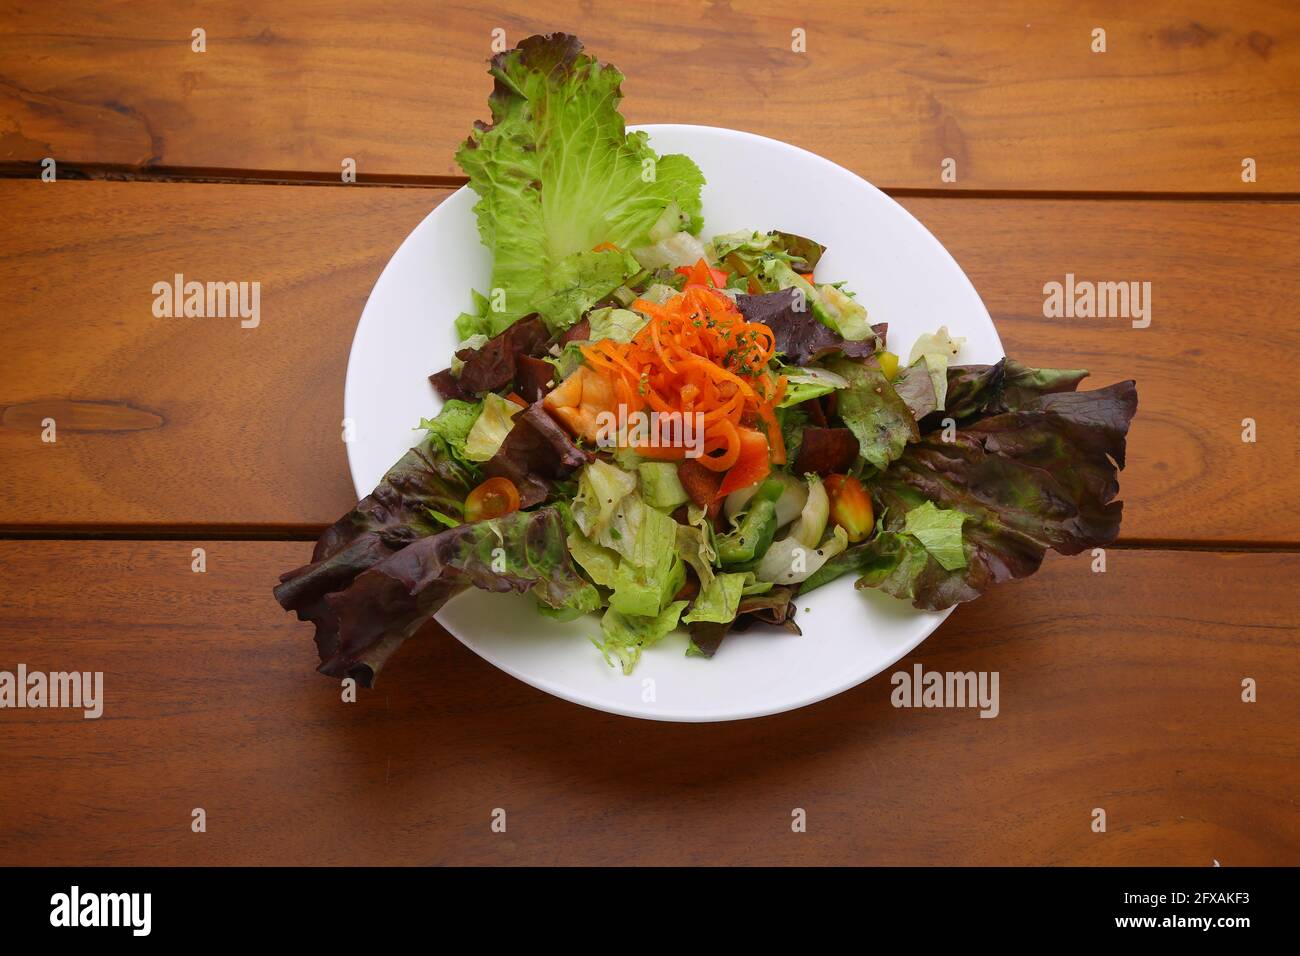 Dark Leafy Green Veg Salad,healthy leafy salad arranged beautifully in a white plate with wooden background Stock Photo